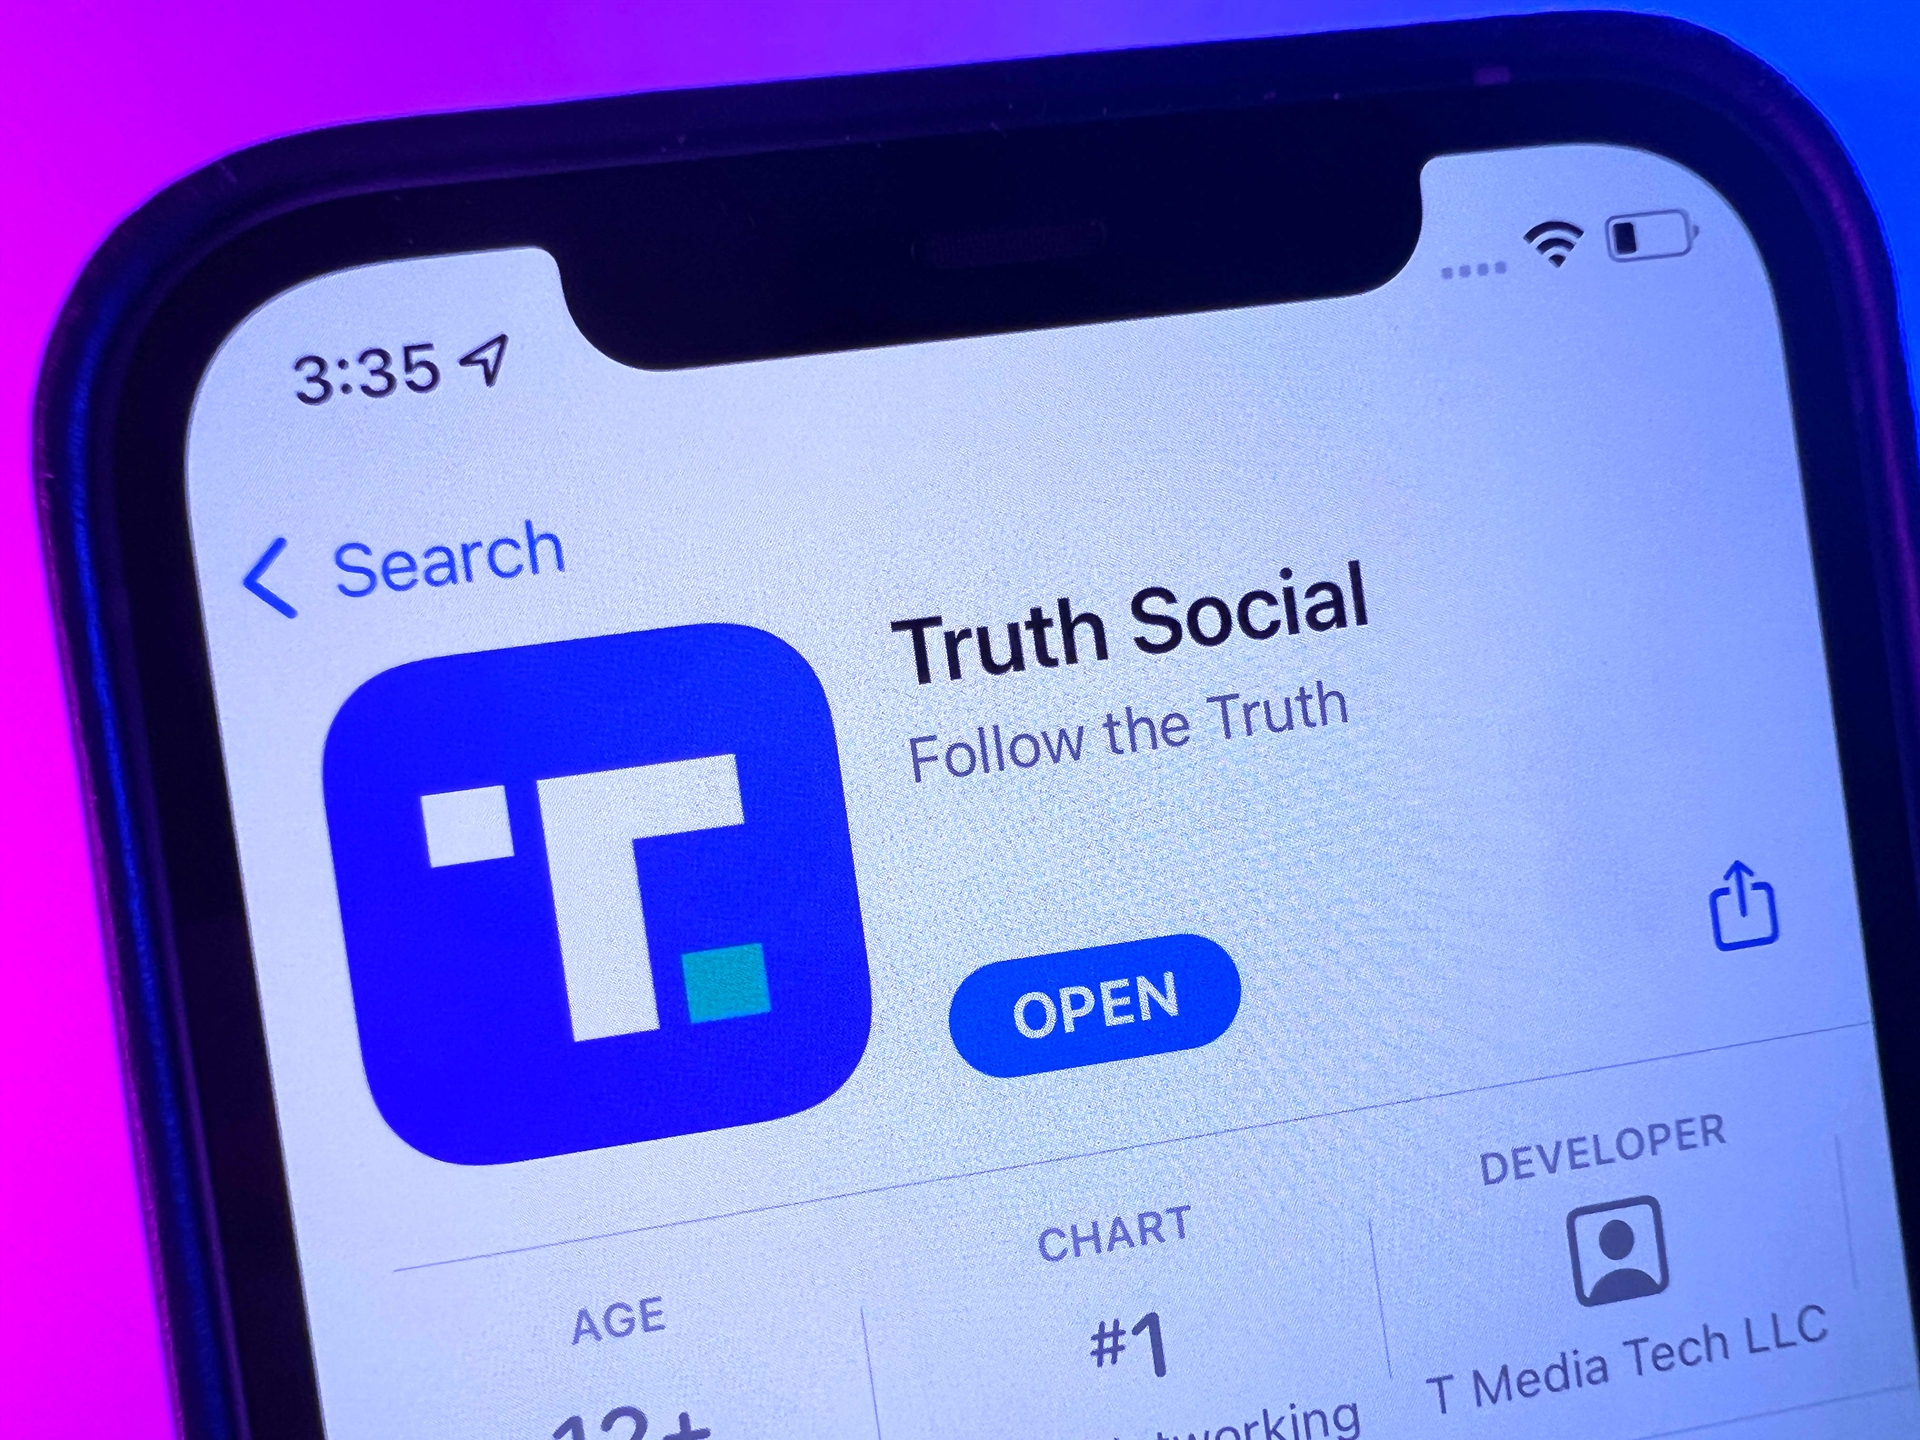 After its release on the Apple App Store, Trump's Truth Social app is now approved for Google Play Store and will be available to Android users very soon.